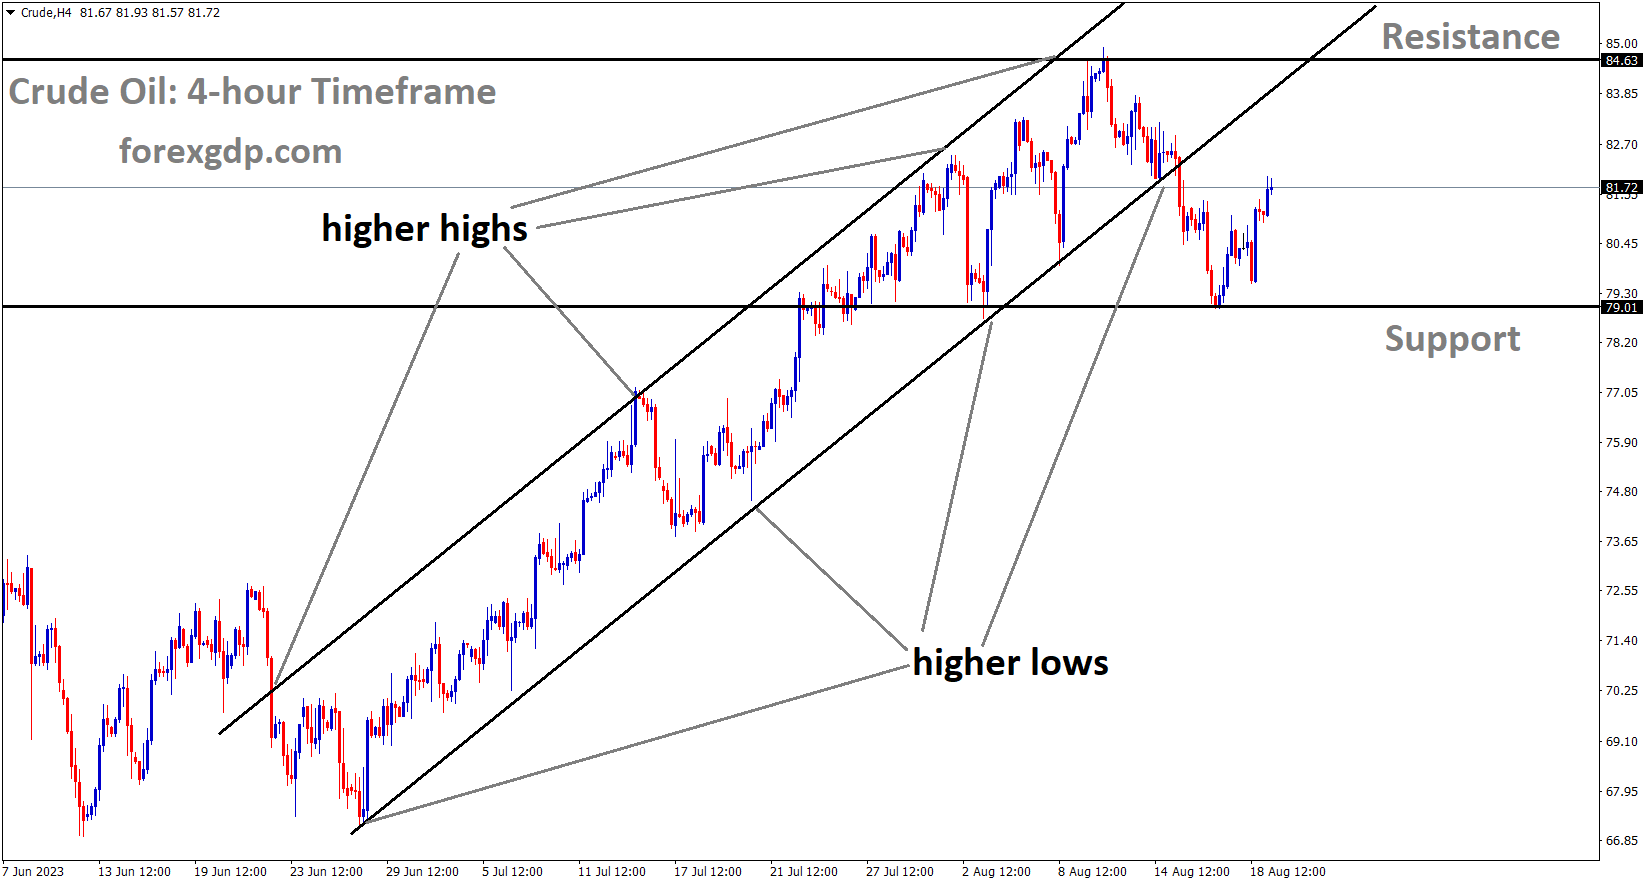 Crude Oil Price is moving in an Ascending channel and the market has rebounded from the higher low area of the channel